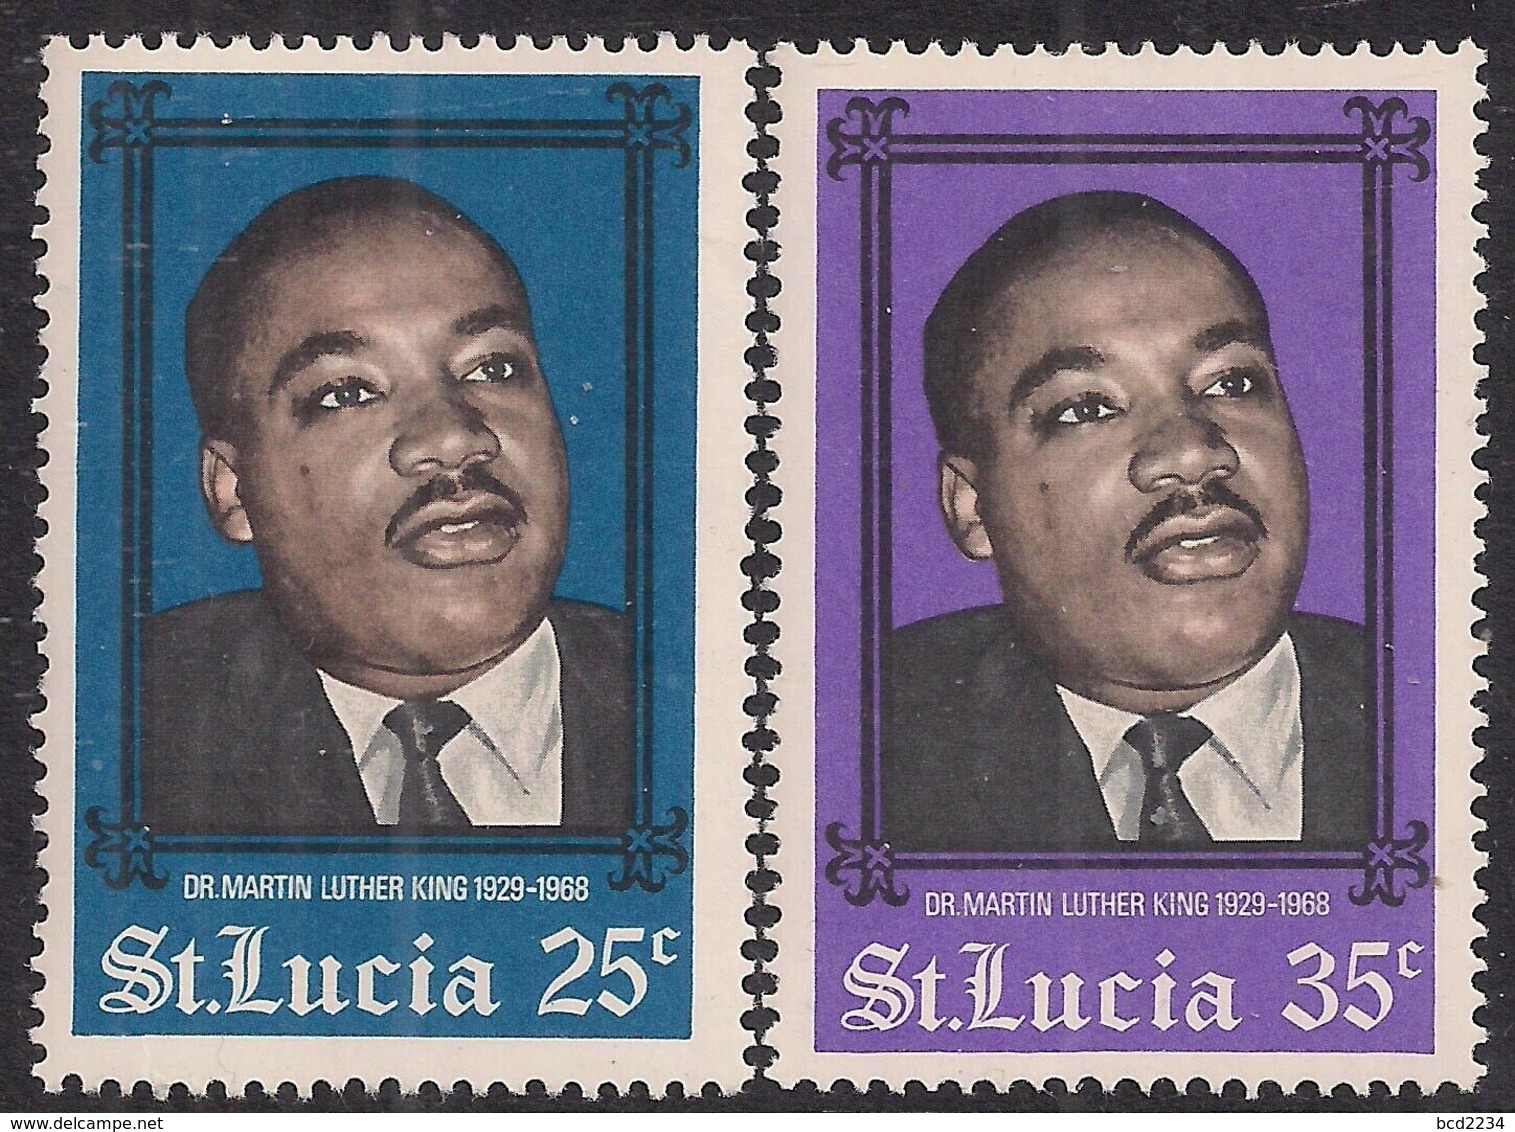 ST SAINT LUCIA WEST INDIES 1968 DR MARTIN LUTHER KING COMMEMORATION FULL SET OF 2 NHM SG 250-1 EQUAL RIGHTS FIGHTER - Martin Luther King